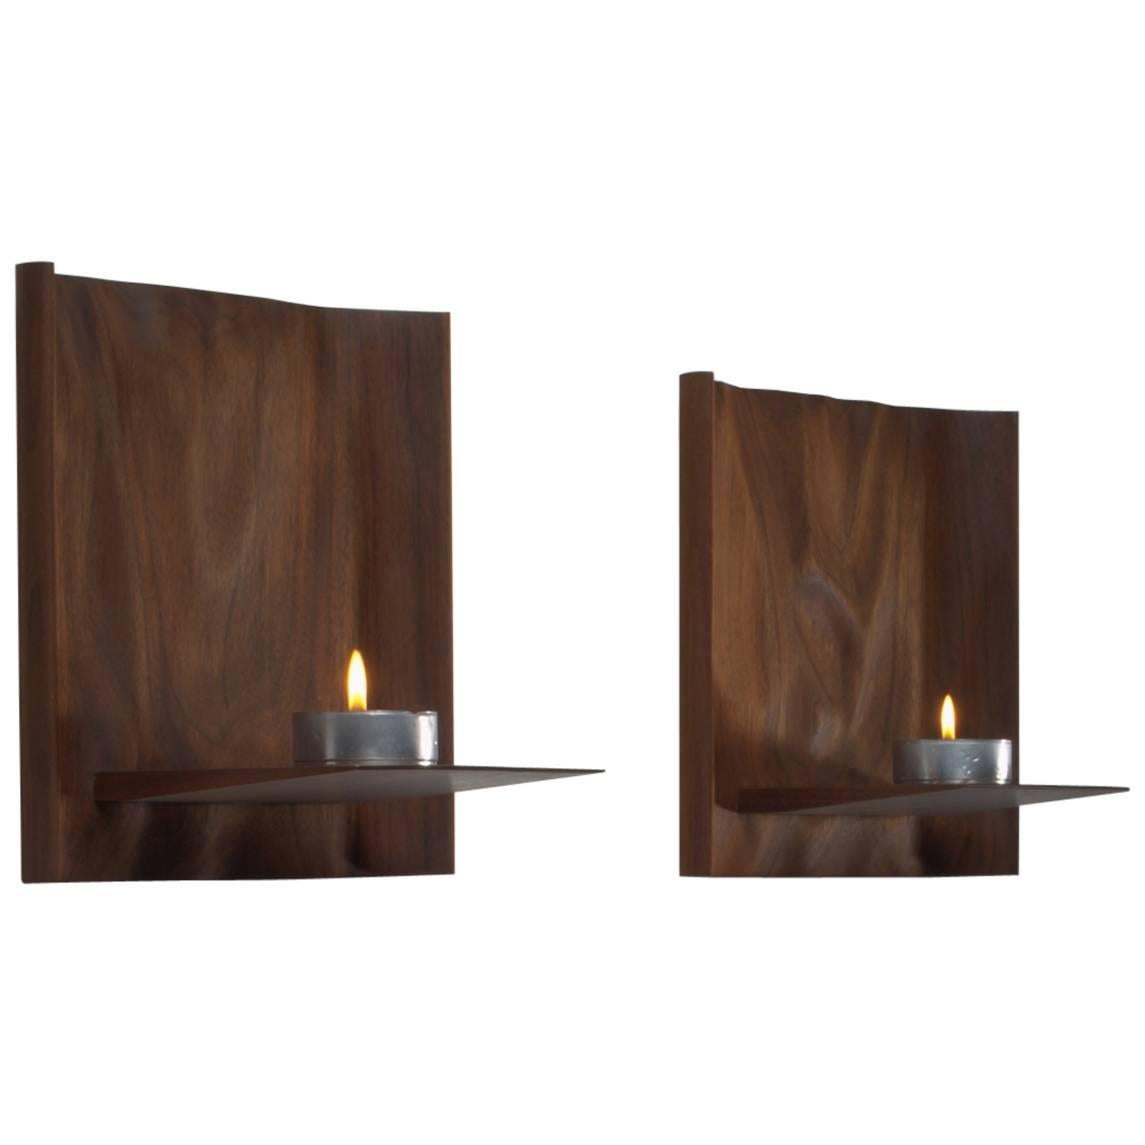 Roger Sloan Pair of Sculptural Walnut Wall Shelves, USA, 1970s For Sale